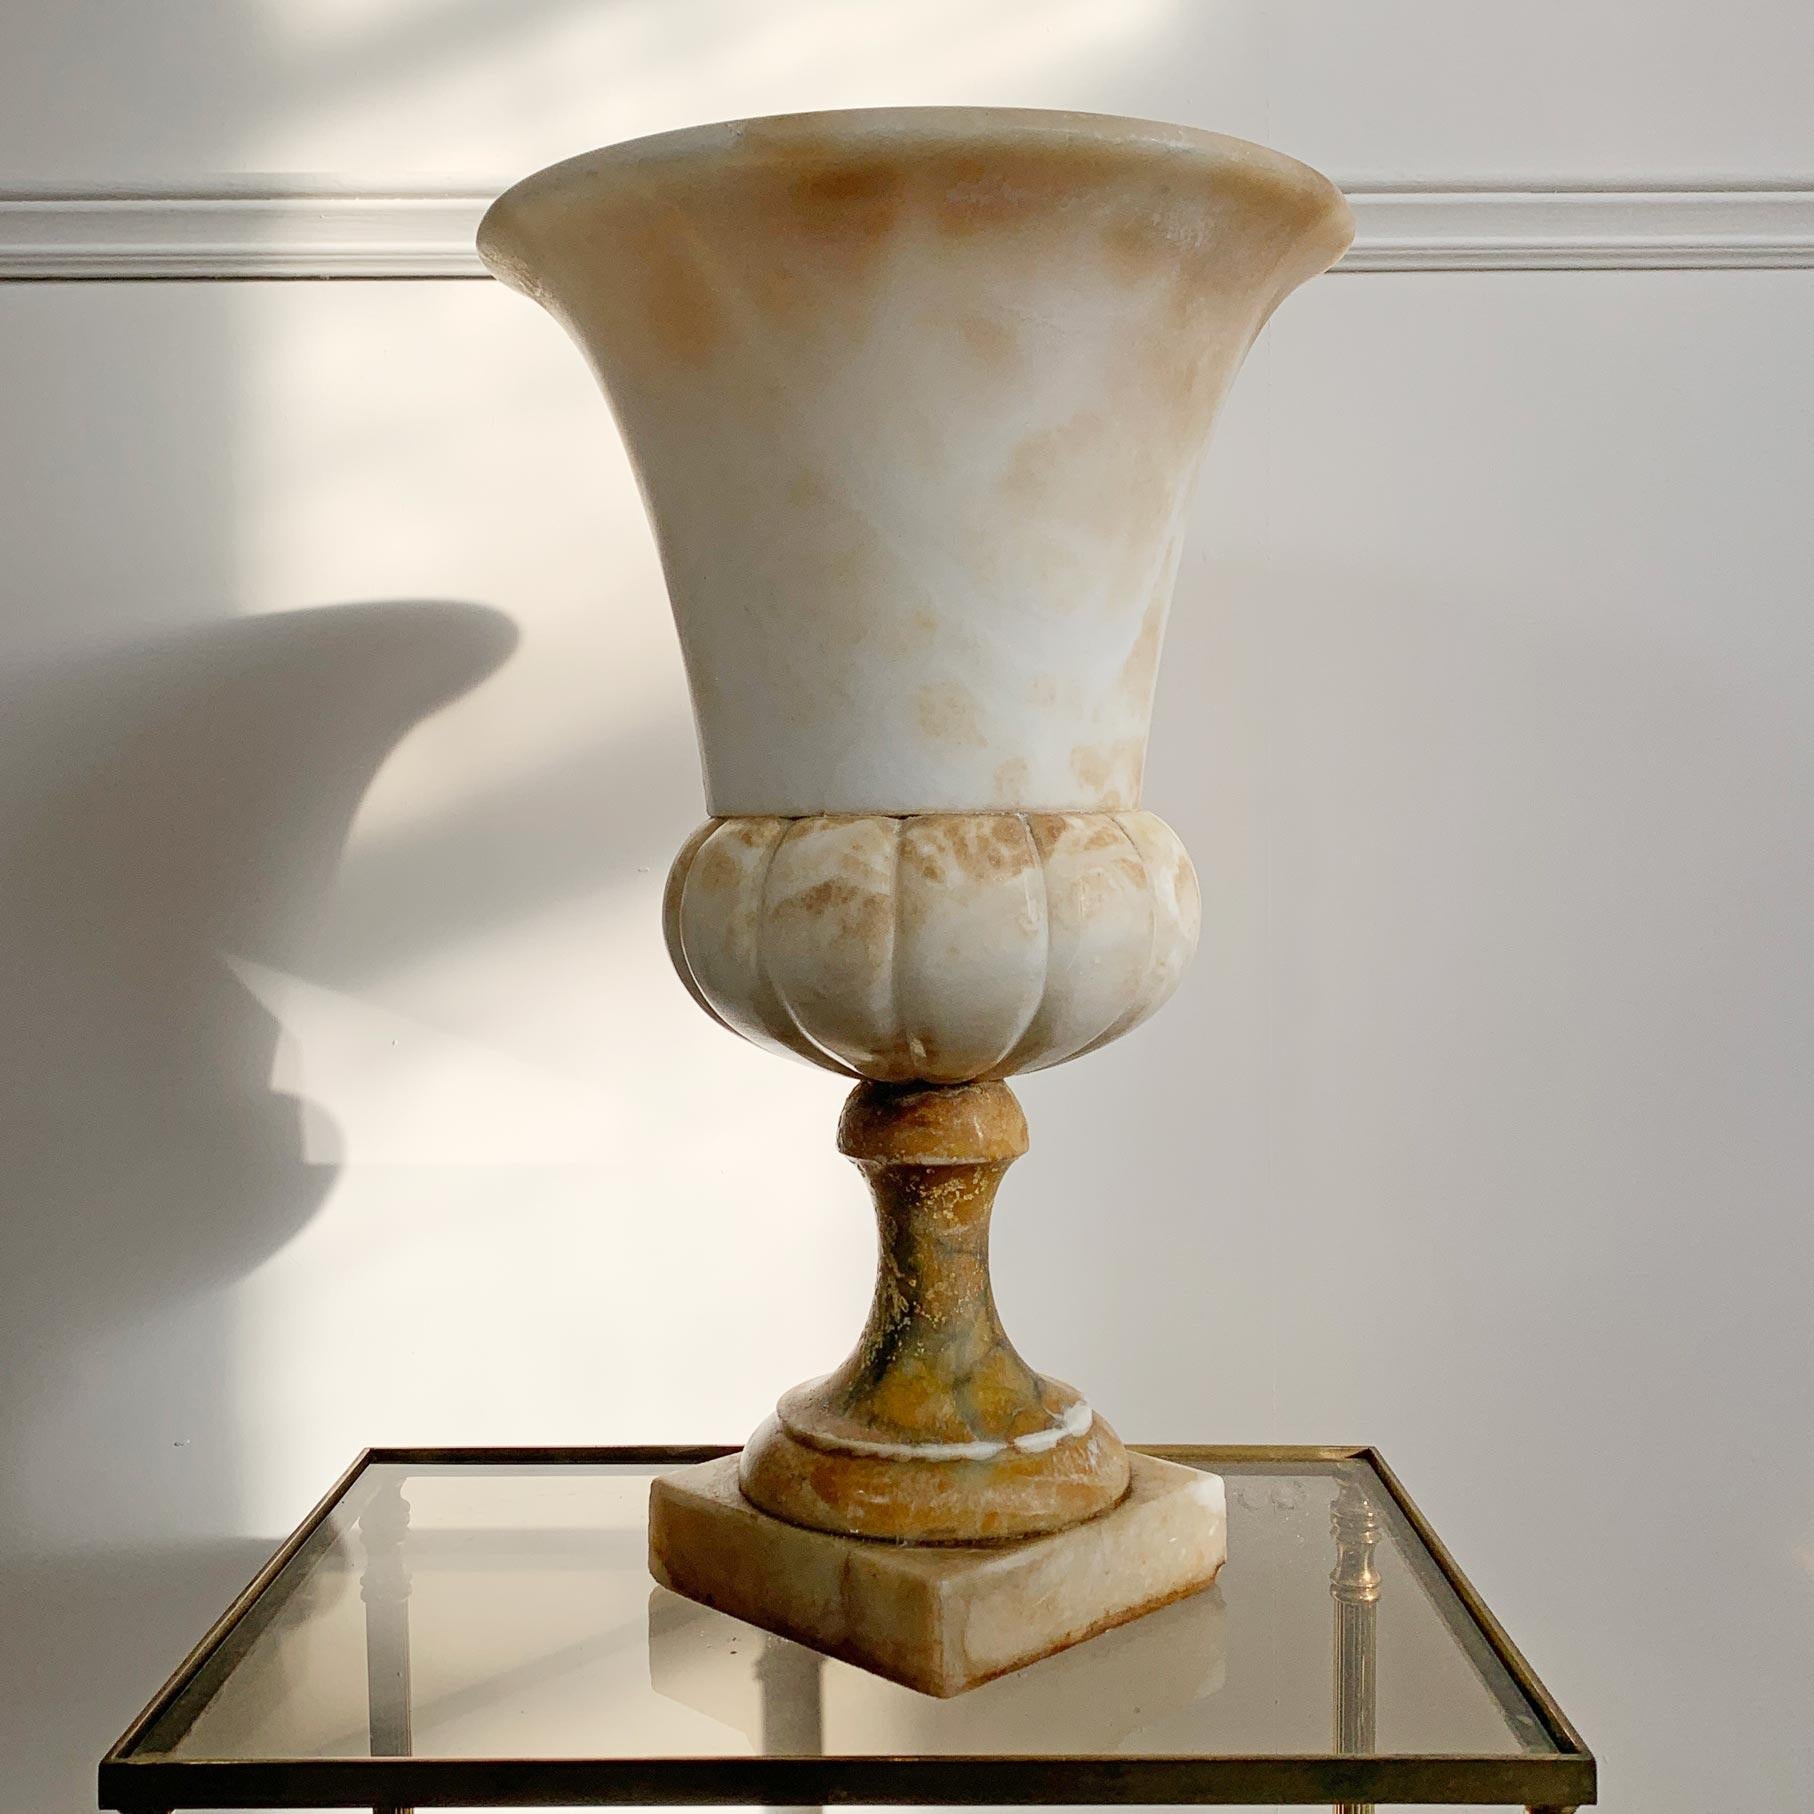 An extremely well carved large grand tour campana style urn, hand carved in Alabaster. Dating to the late 19th century. Probably Italian, made as a Grand Tour piece.

Height 44cm x Width 27.5cm

Base 13.5cm Depth inside Urn 27cm

Small loss to